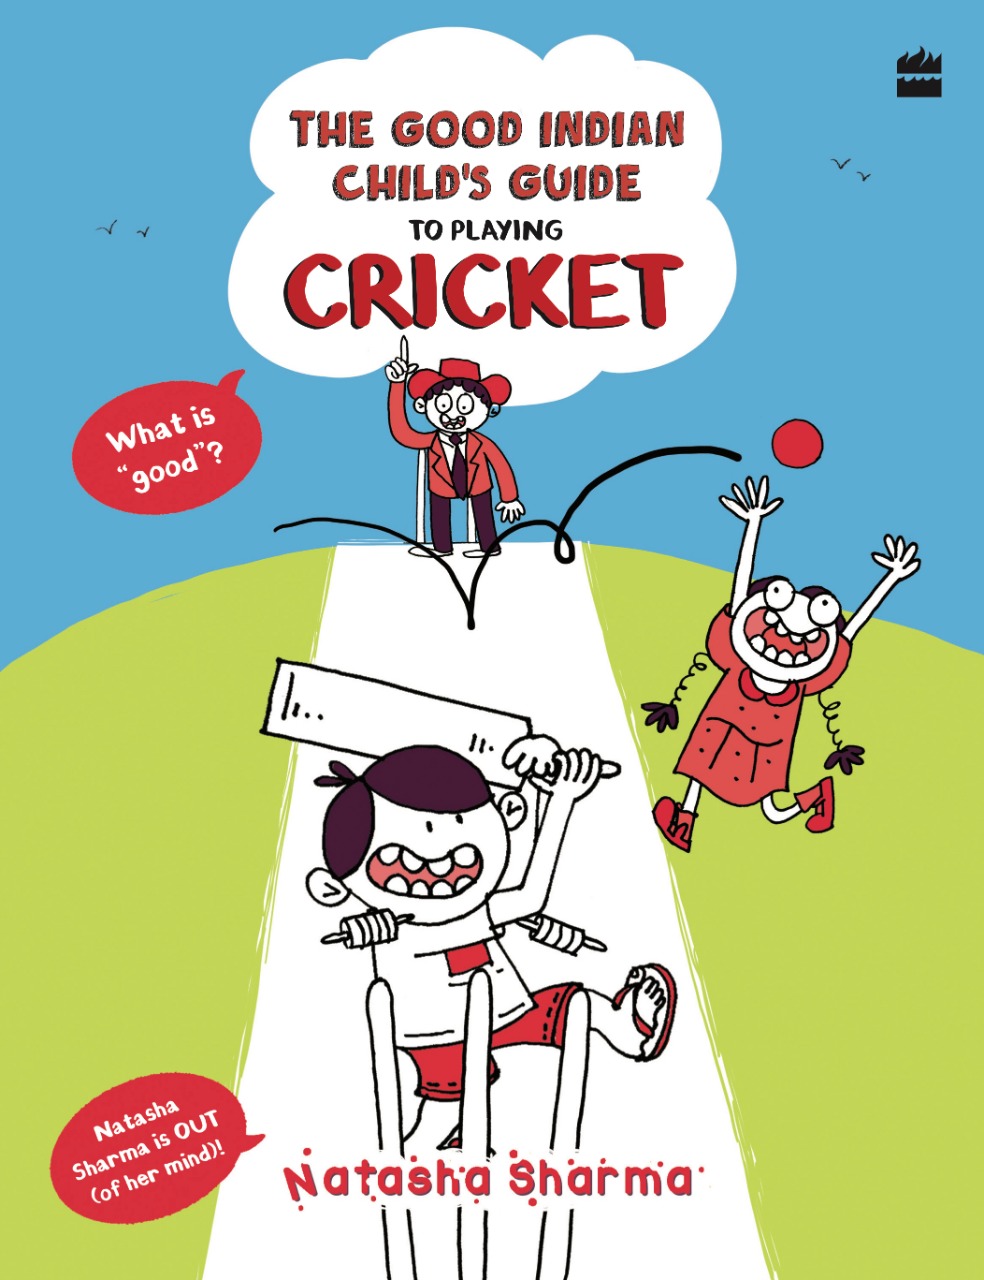 The Good Indian Child's Guide to Playing Crikcket